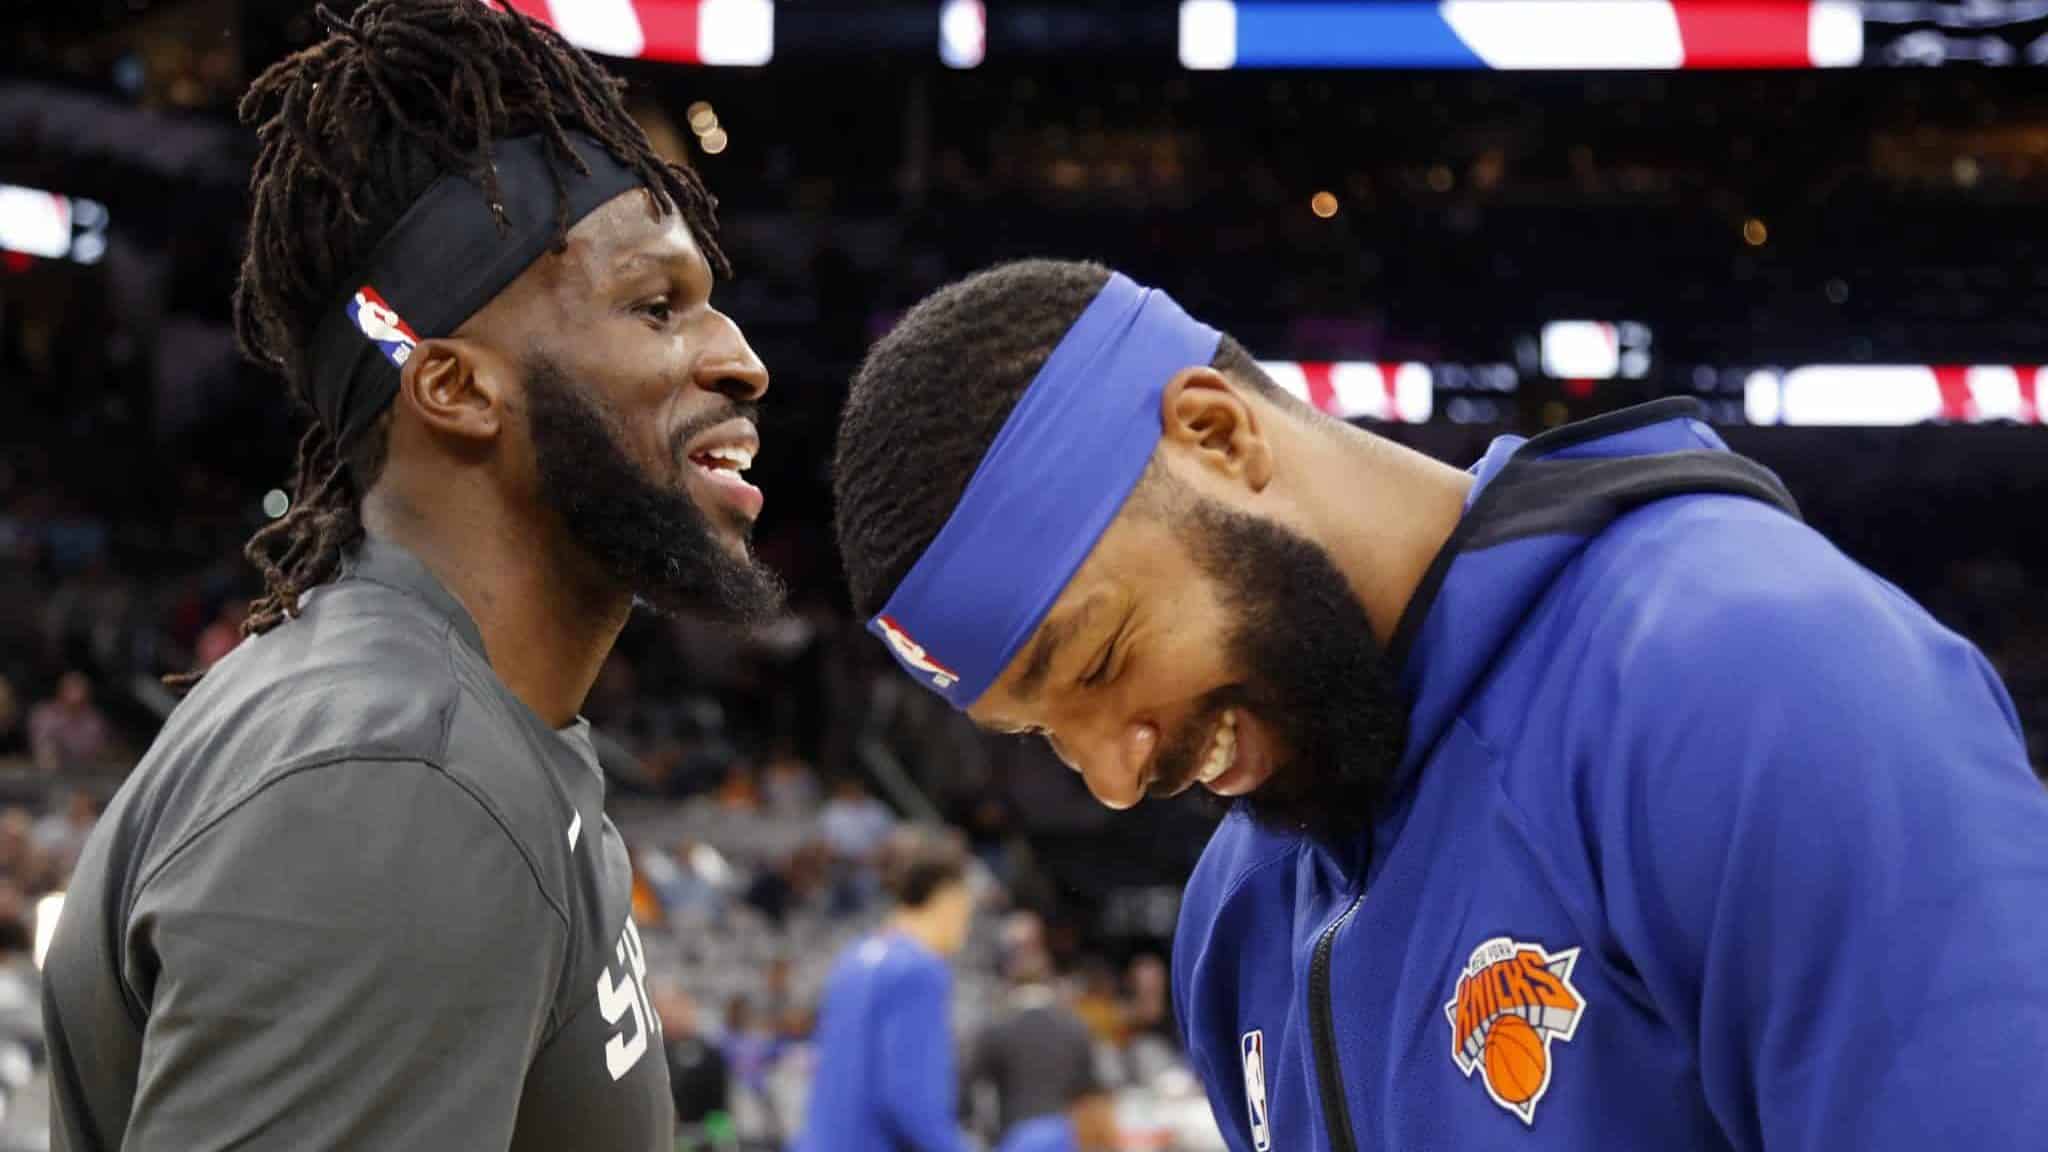 SAN ANTONIO,TX - OCTOBER 23: Marcus Morris #13 of the New York Knicks jokes with DeMarre Carroll #77 of the San Antonio Spurs before the start of their game at AT&T Center on October 23 , 2019 in San Antonio, Texas. NOTE TO USER: User expressly acknowledges and agrees that , by downloading and or using this photograph, User is consenting to the terms and conditions of the Getty Images License Agreement.